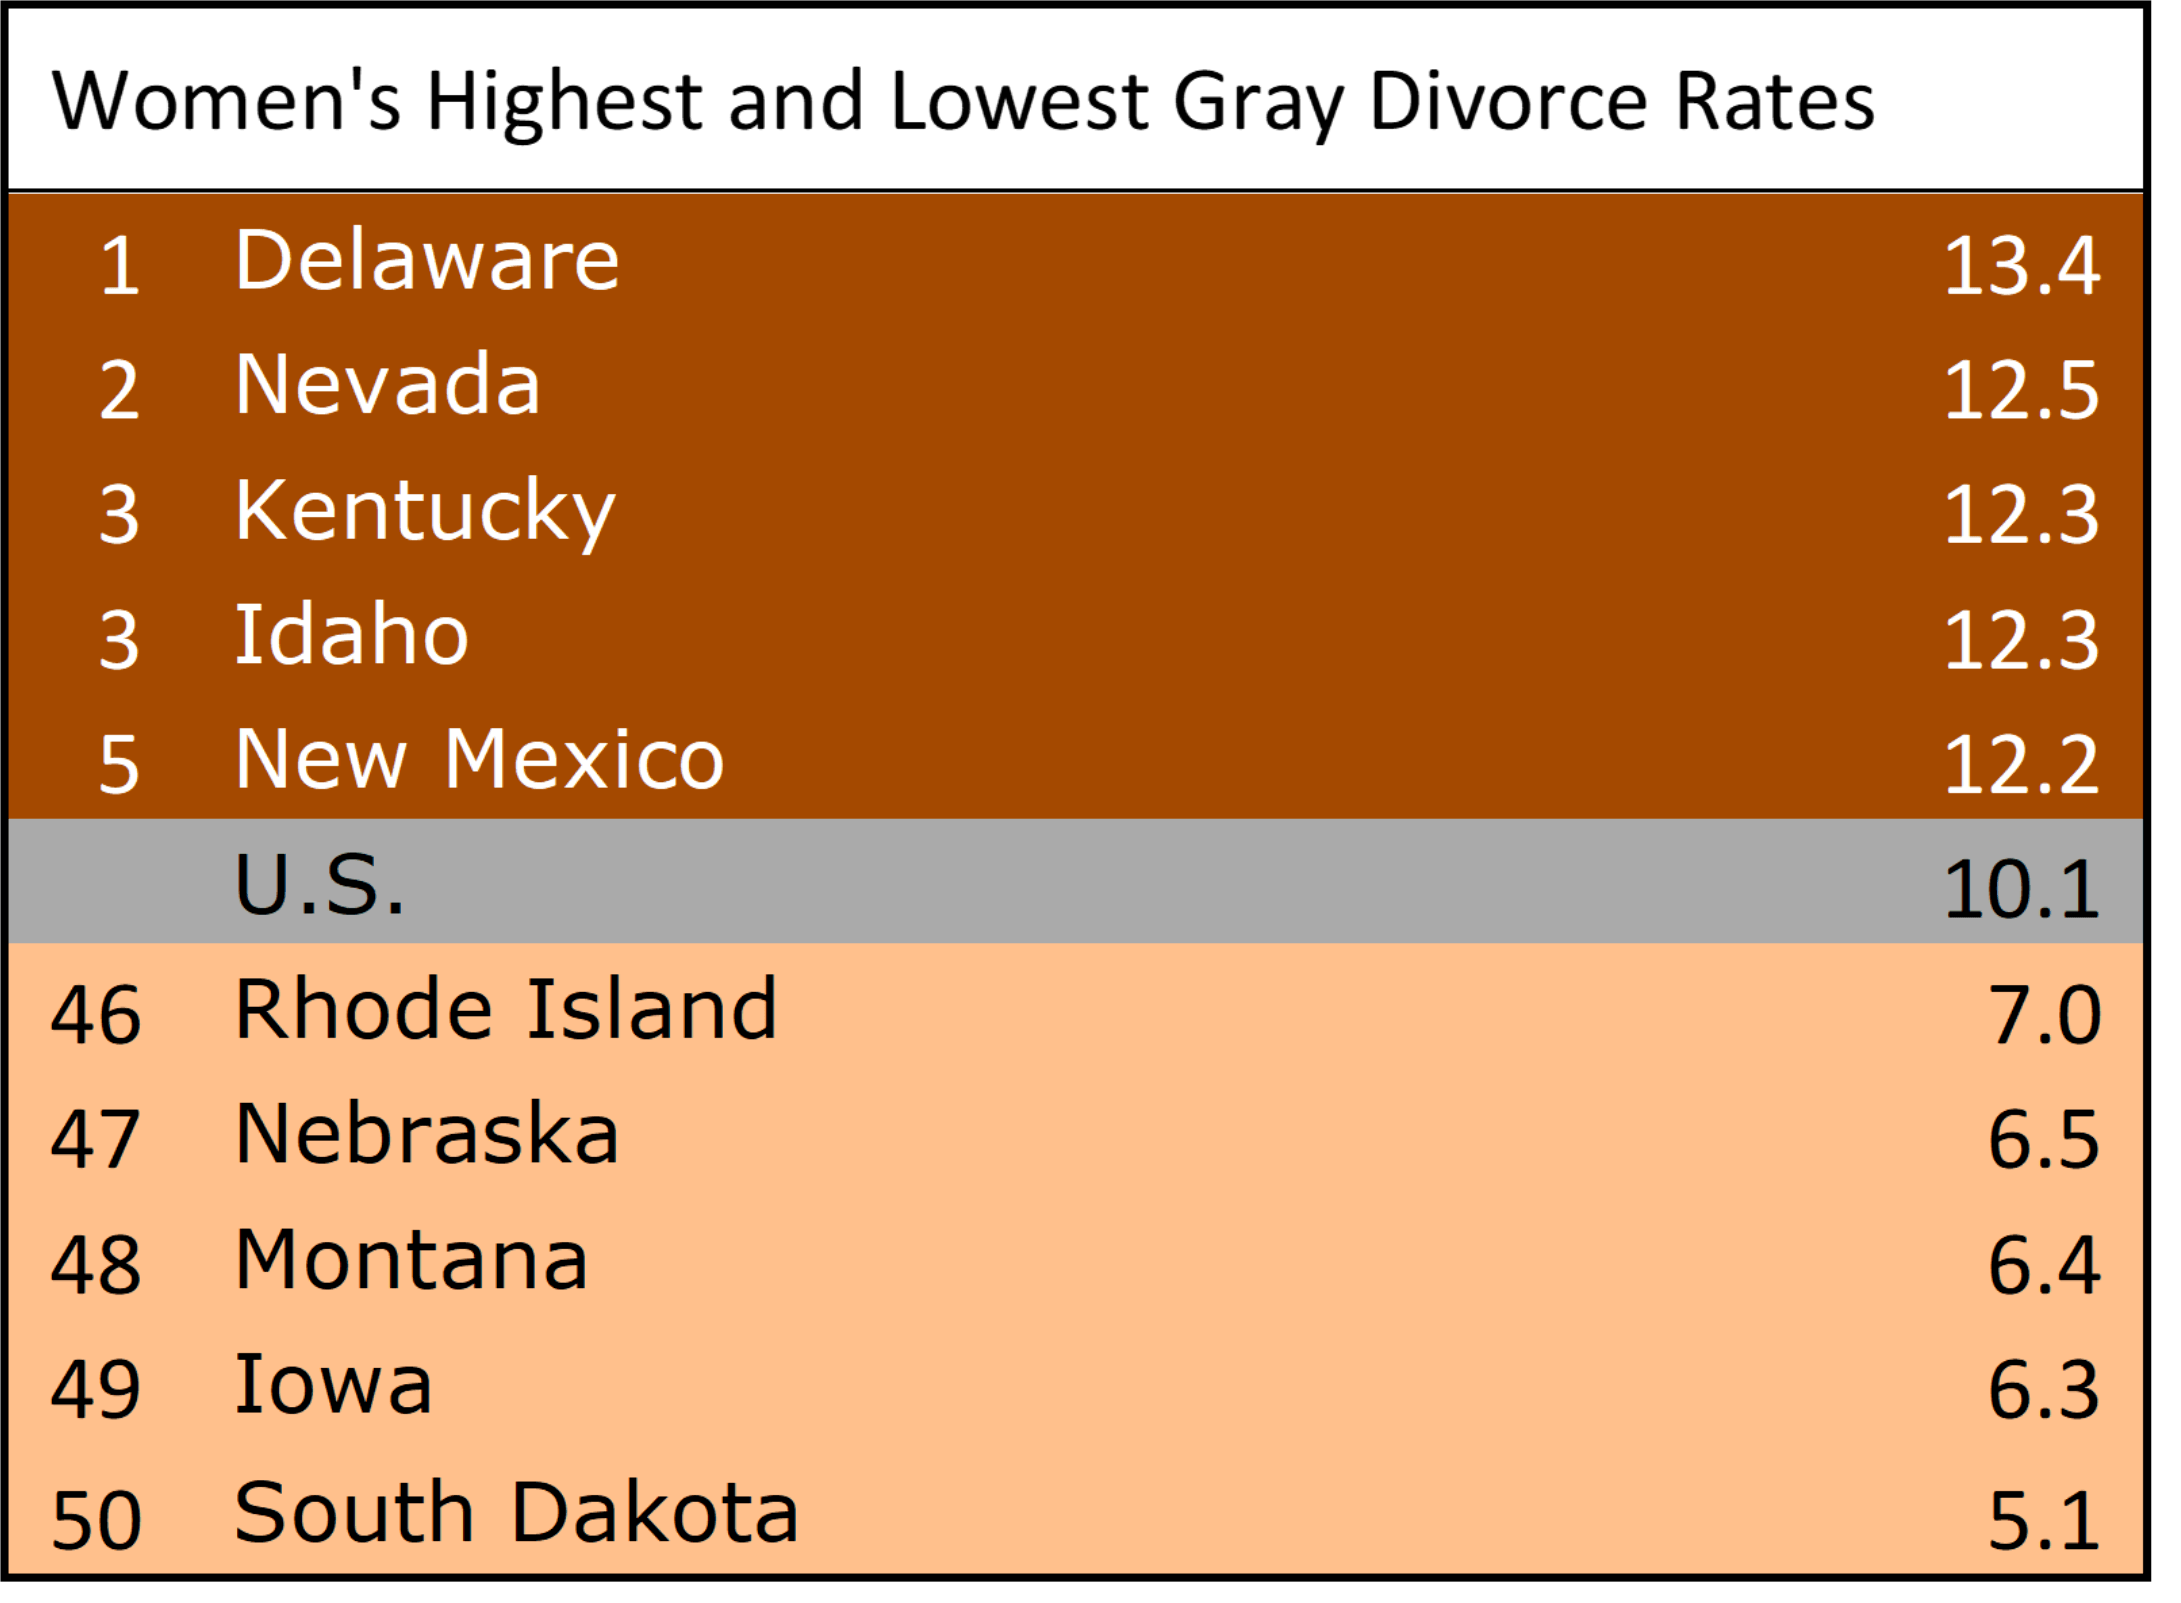 Figure 2: Women's Highest and Lowest Gray Divorce Rates